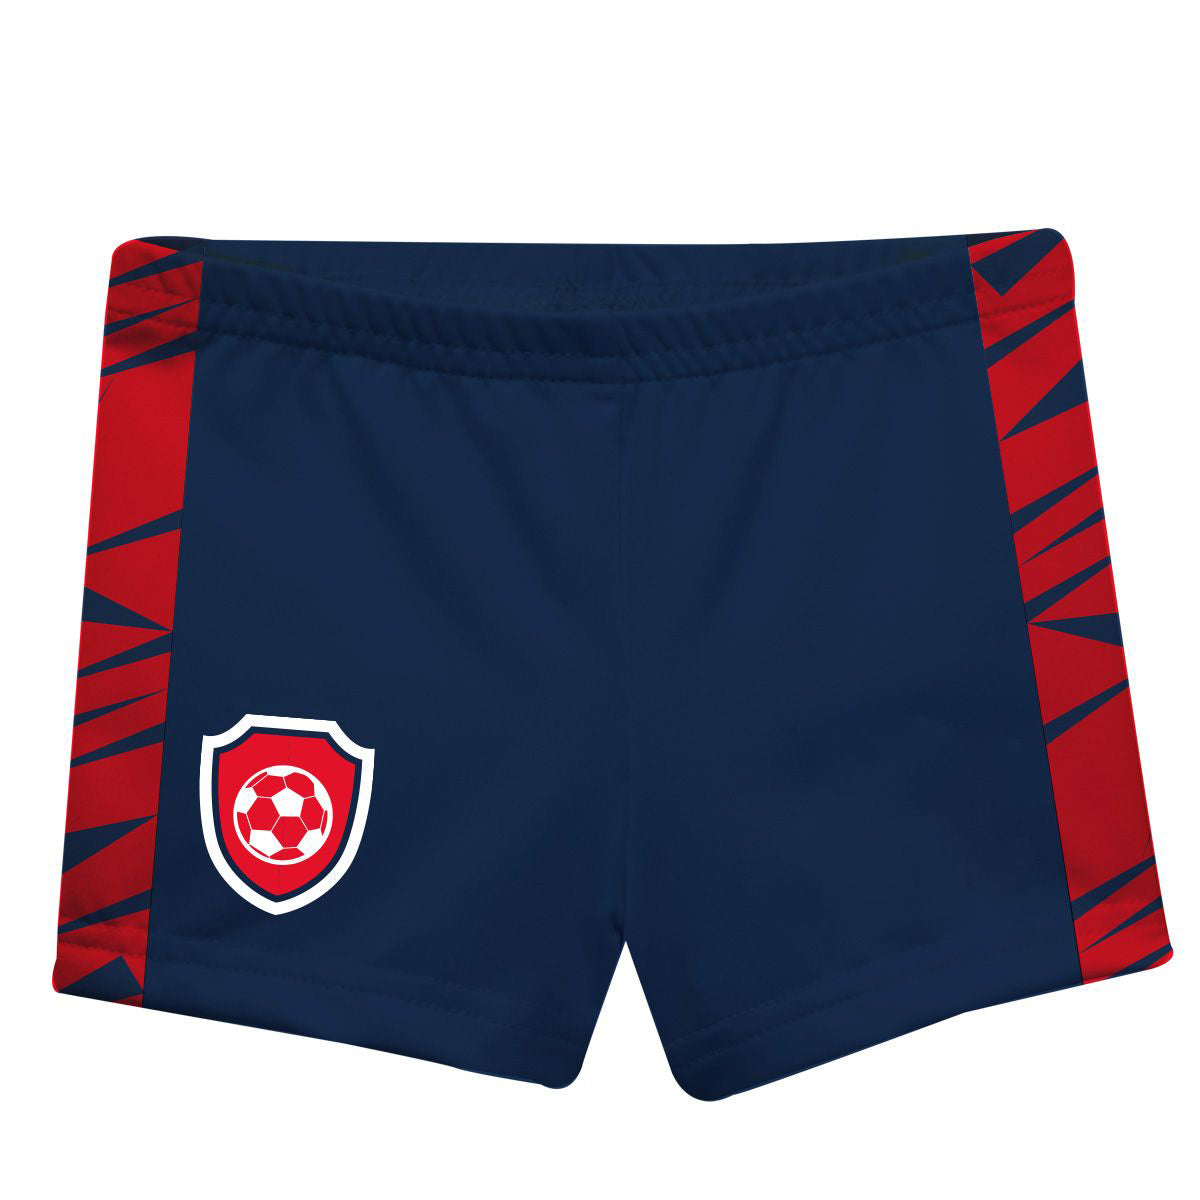 Soccer Personalized Number Navy and Red Shorties - Wimziy&Co.